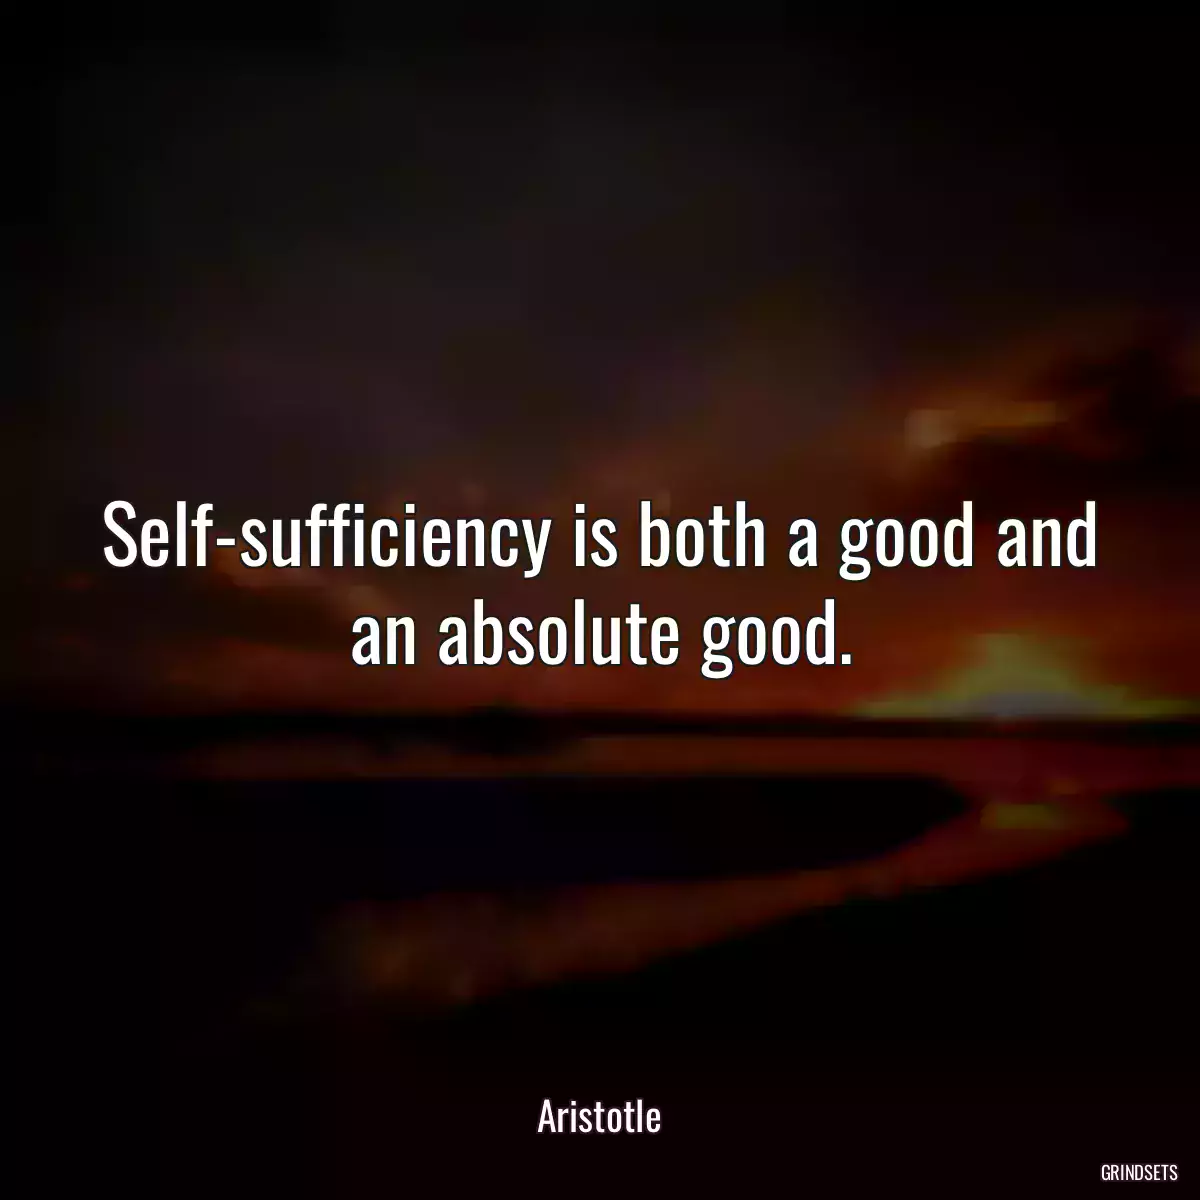 Self-sufficiency is both a good and an absolute good.